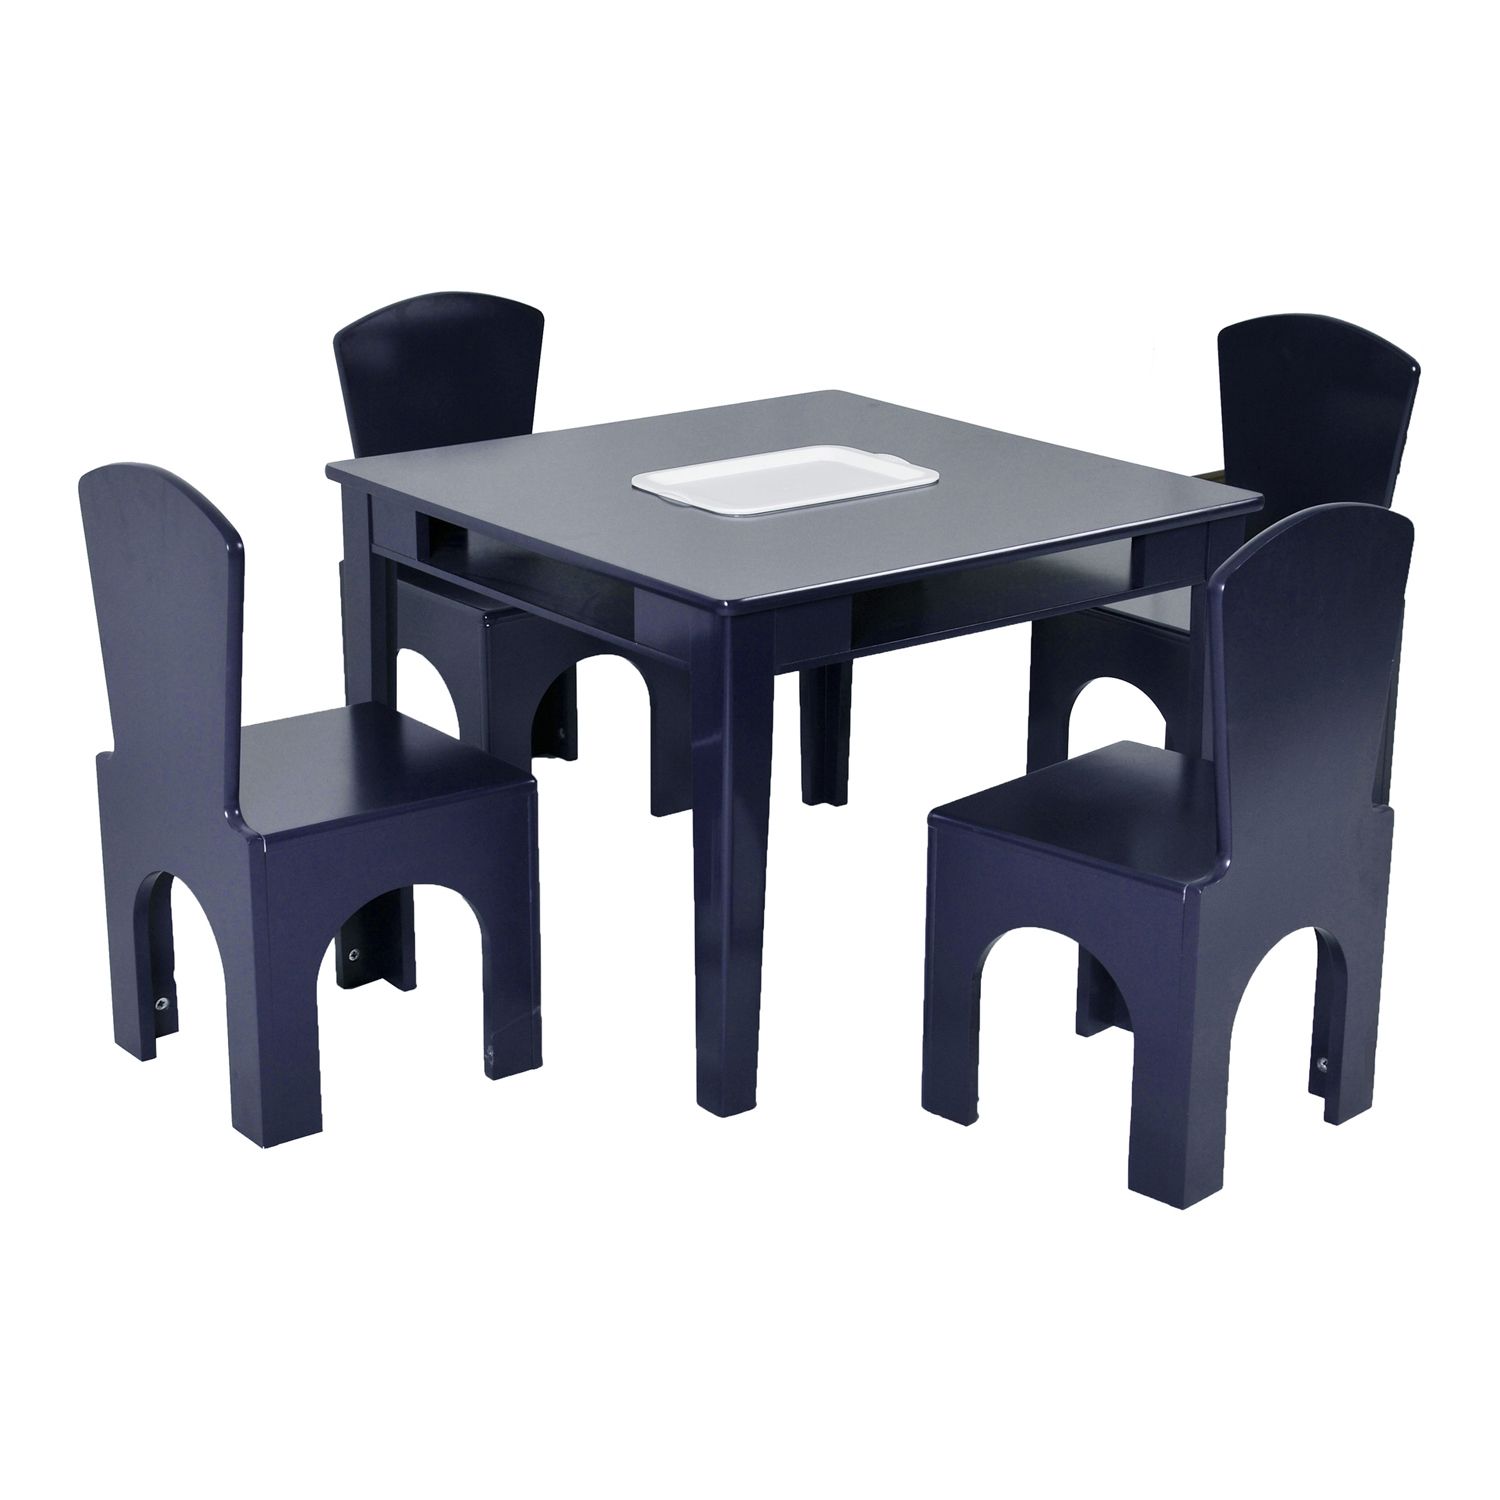 lipper childrens rectangular table and chair set